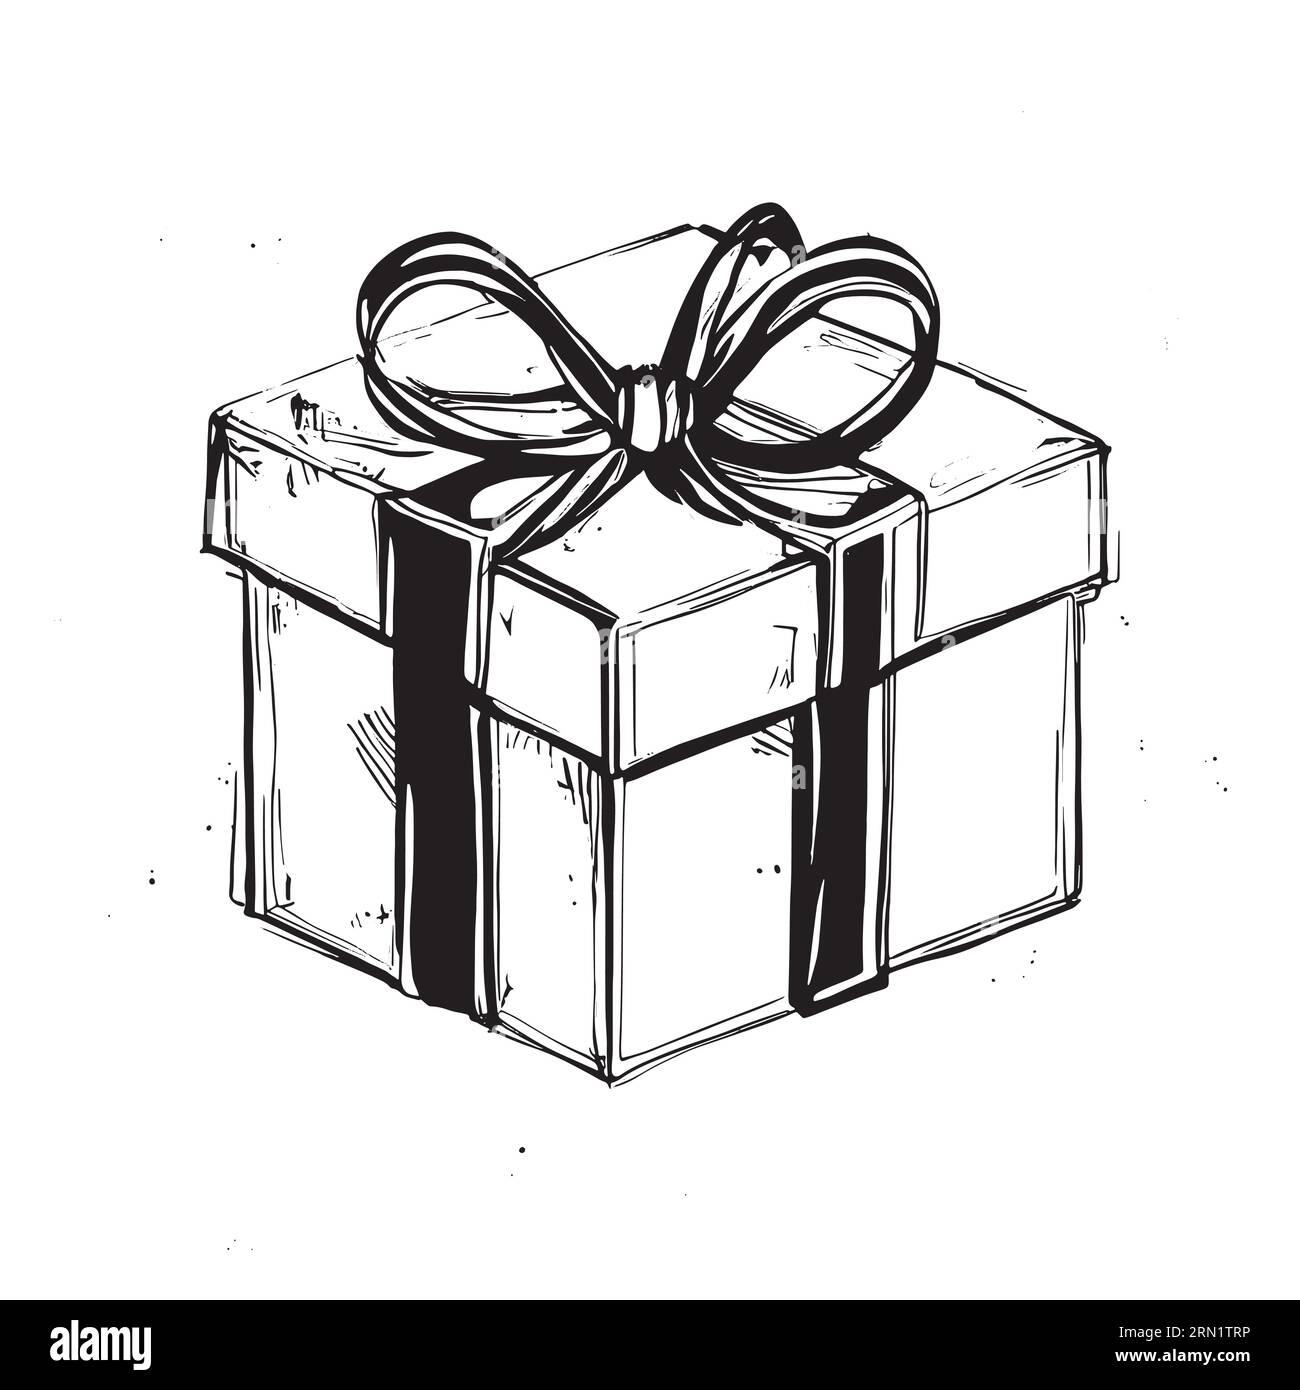 https://c8.alamy.com/comp/2RN1TRP/hand-drawn-sketch-of-gift-box-vector-illustration-isolated-on-white-background-2RN1TRP.jpg